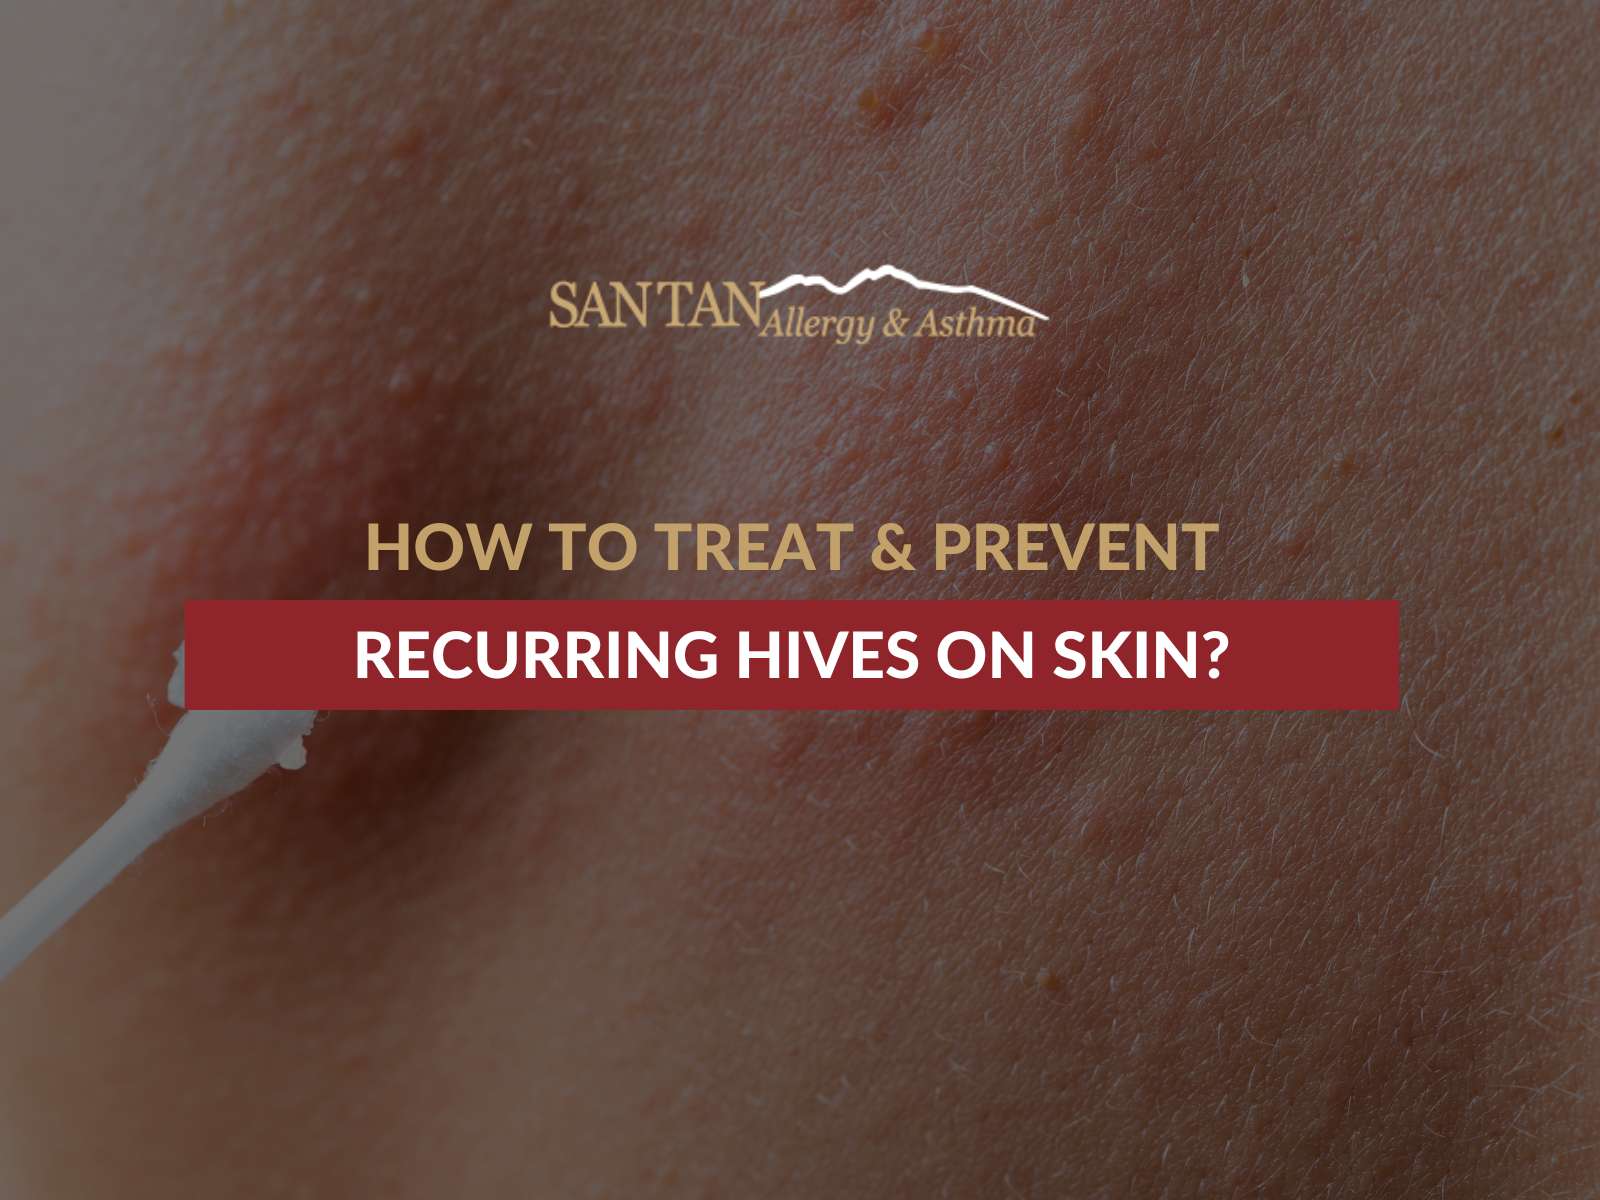 How To Treat & Prevent Recurring Hives On Skin